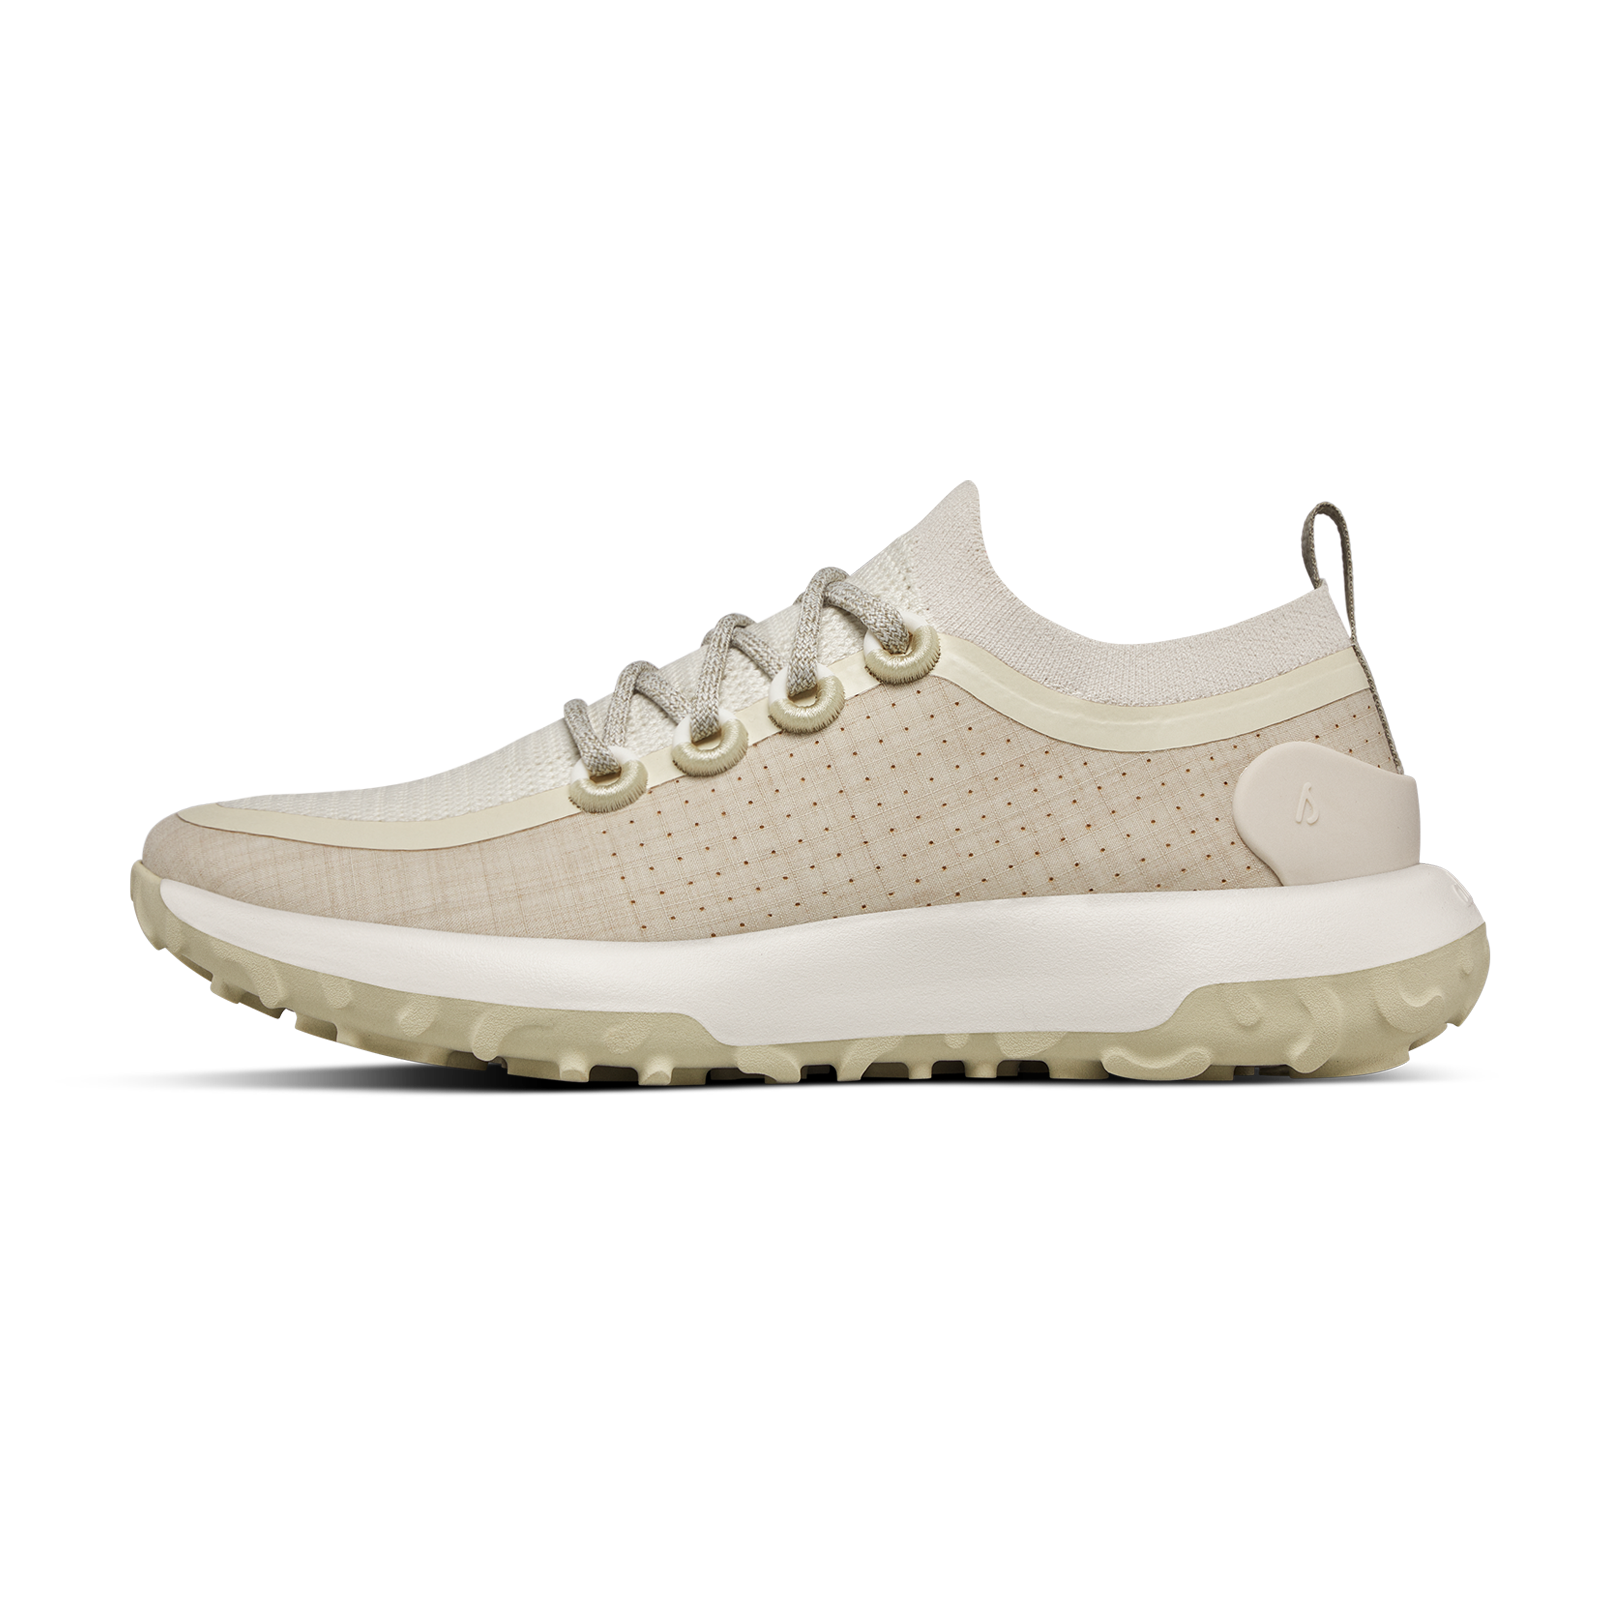 Men's Trail Runners SWT - Natural White (Cream Sole)